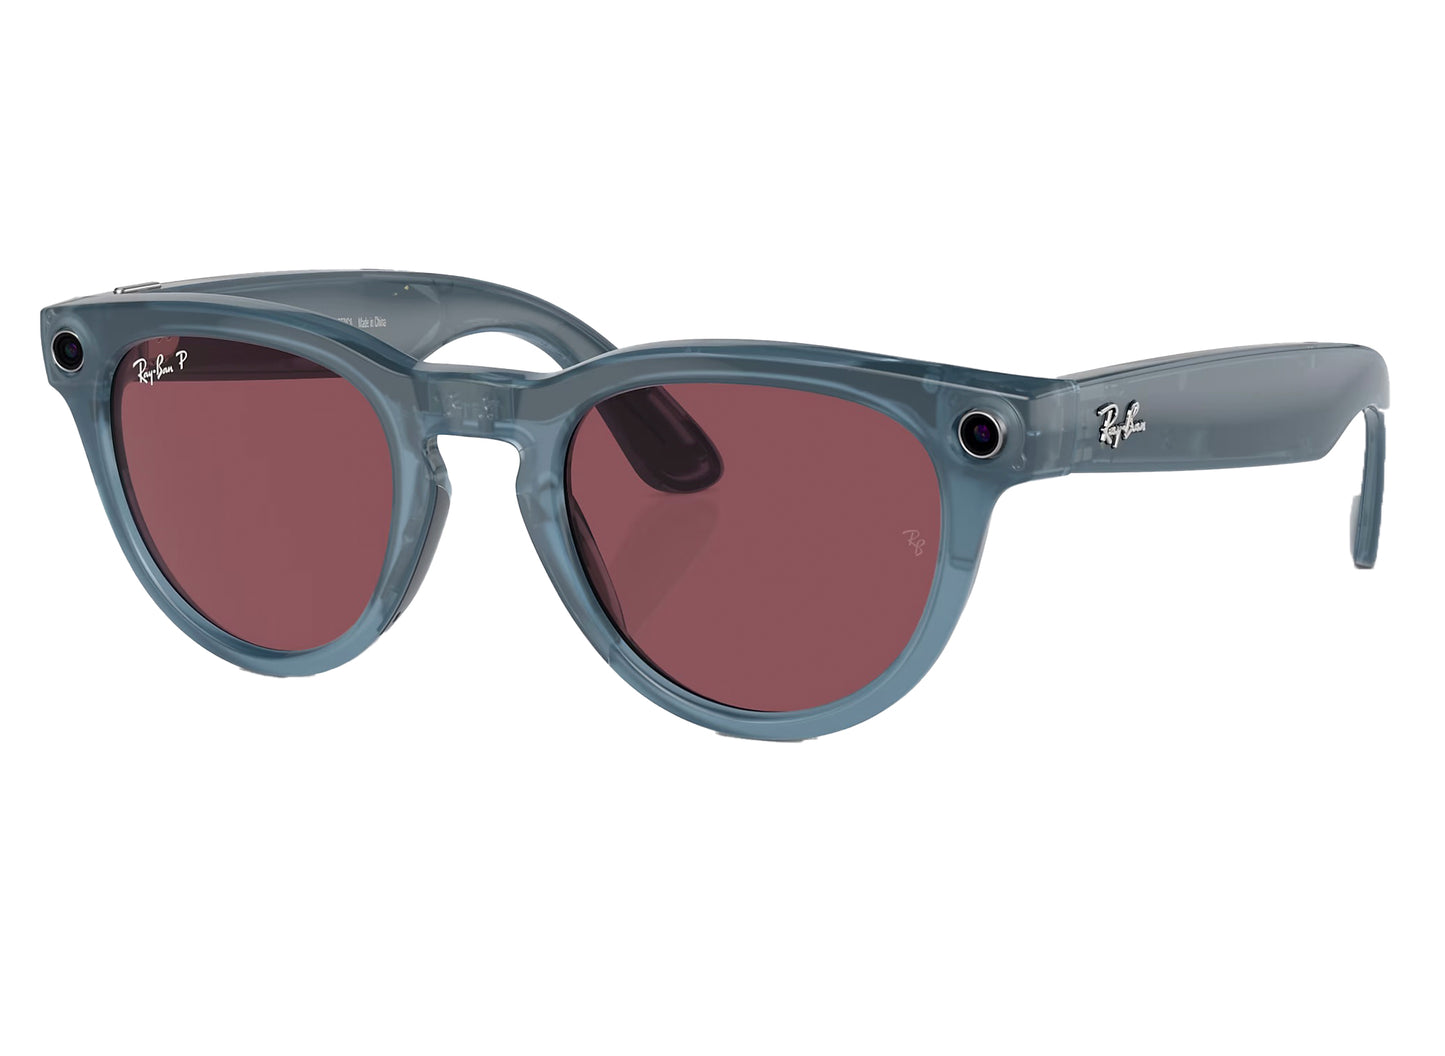 Ray-Ban Meta Headliner in Shiny Jeans Blue w/ Polarized Dusty Red Lenses xld